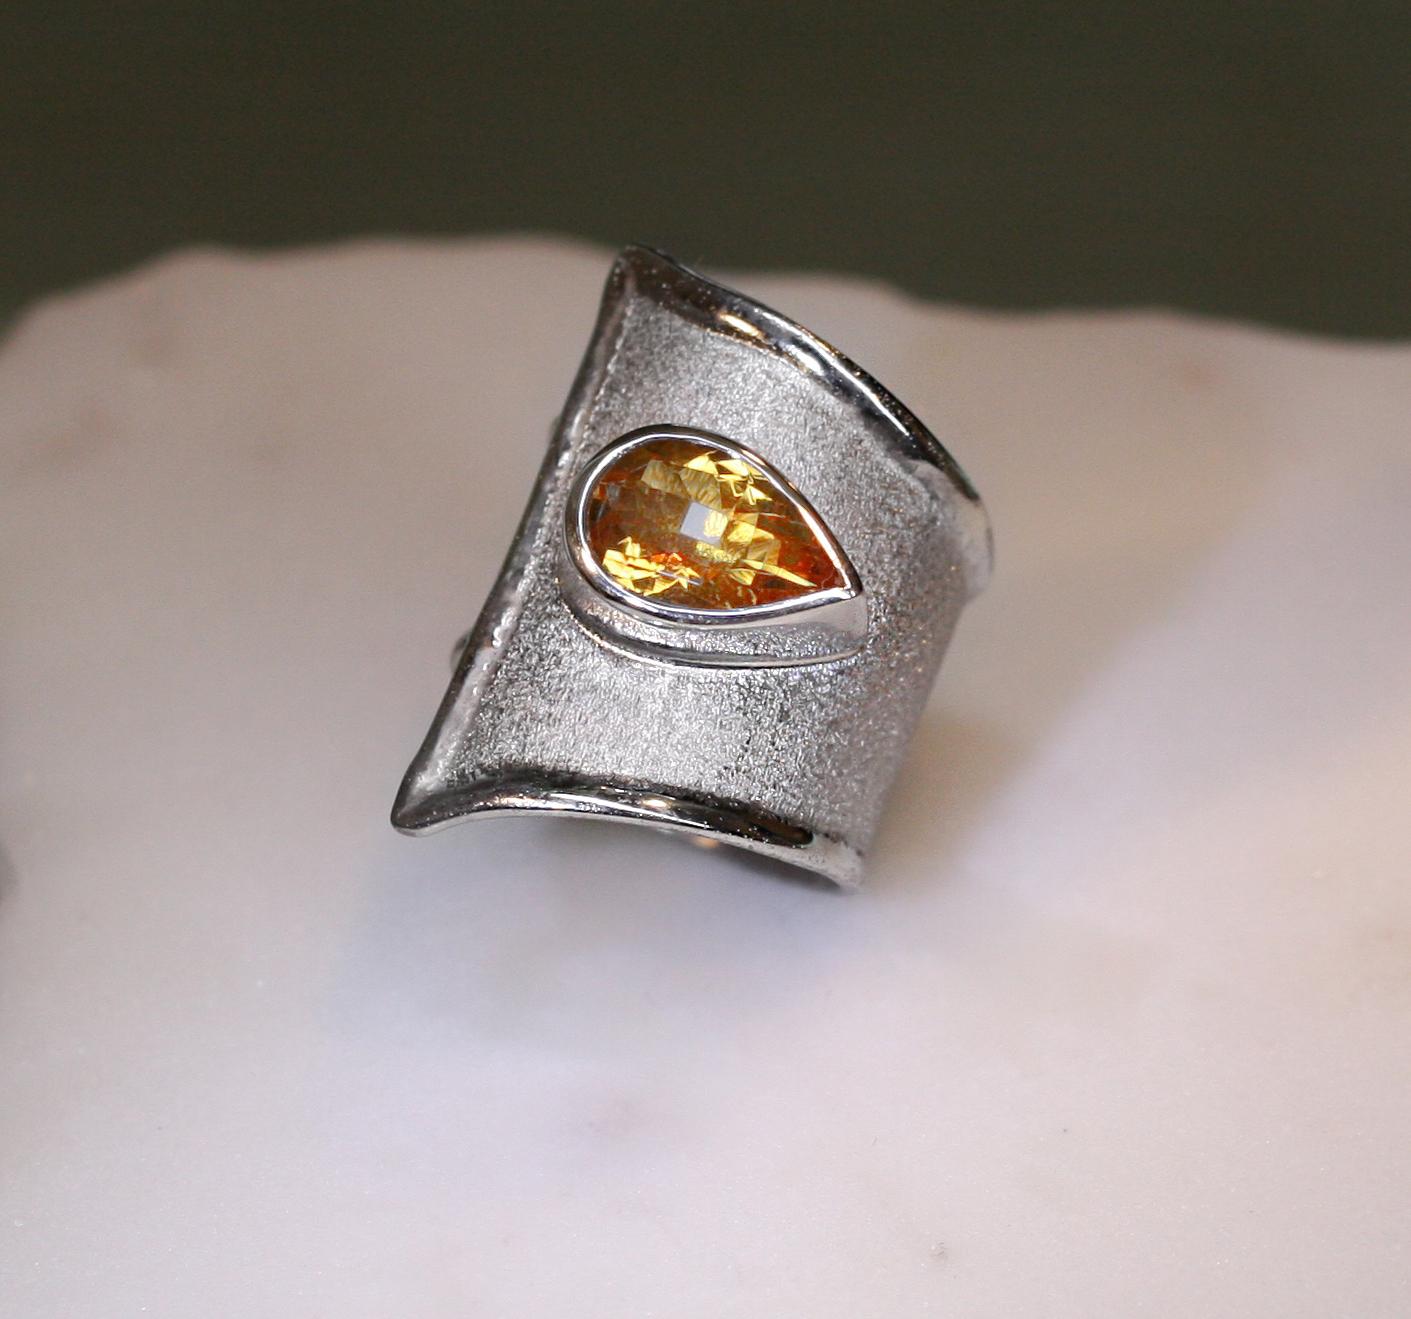 One of a kind Artisan Yianni Creations adjustable ring handcrafted in Greece from fine silver 950 purity and plated with palladium to protect it from the tarnish. This ring features 3.80 Carat teardrop chape Citrine complemented by unique techniques